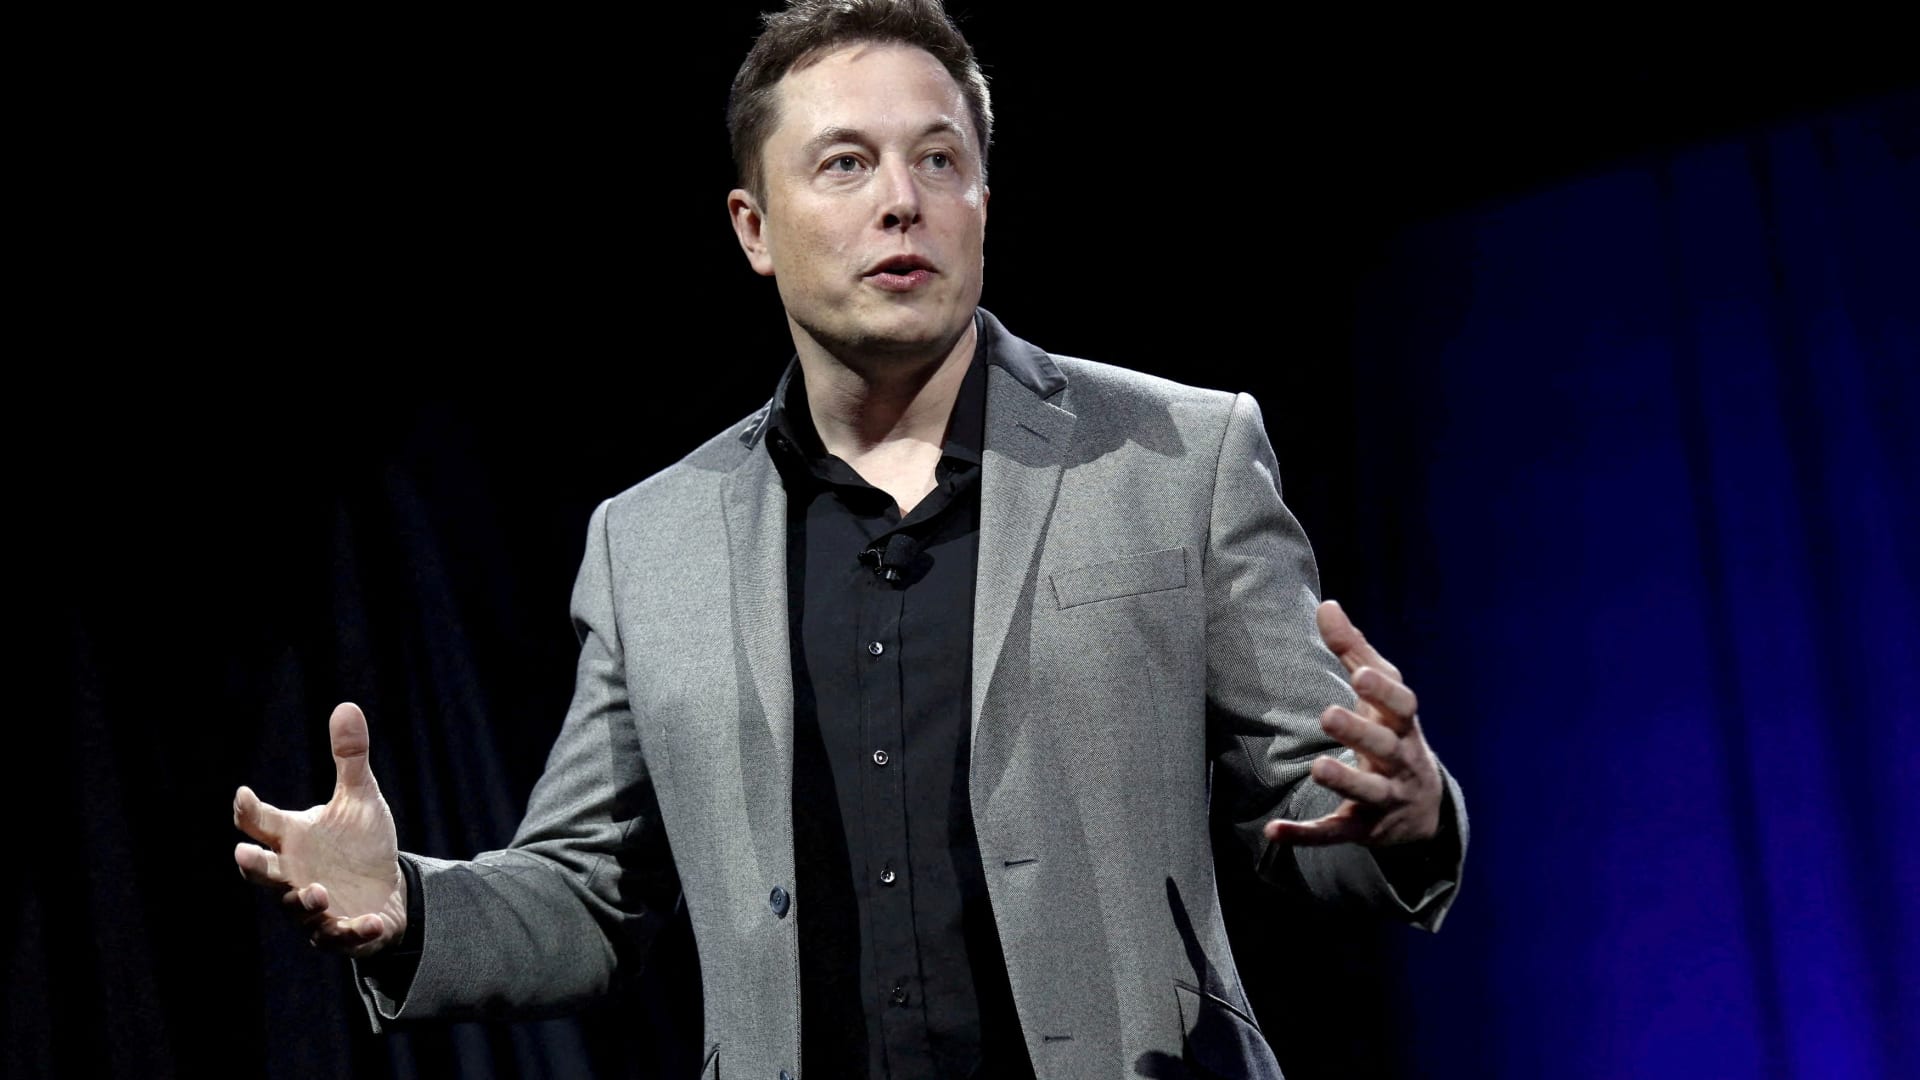 elon-musk-challenges-twitter-ceo-parag-agrawal-to-a-debate-on-bots